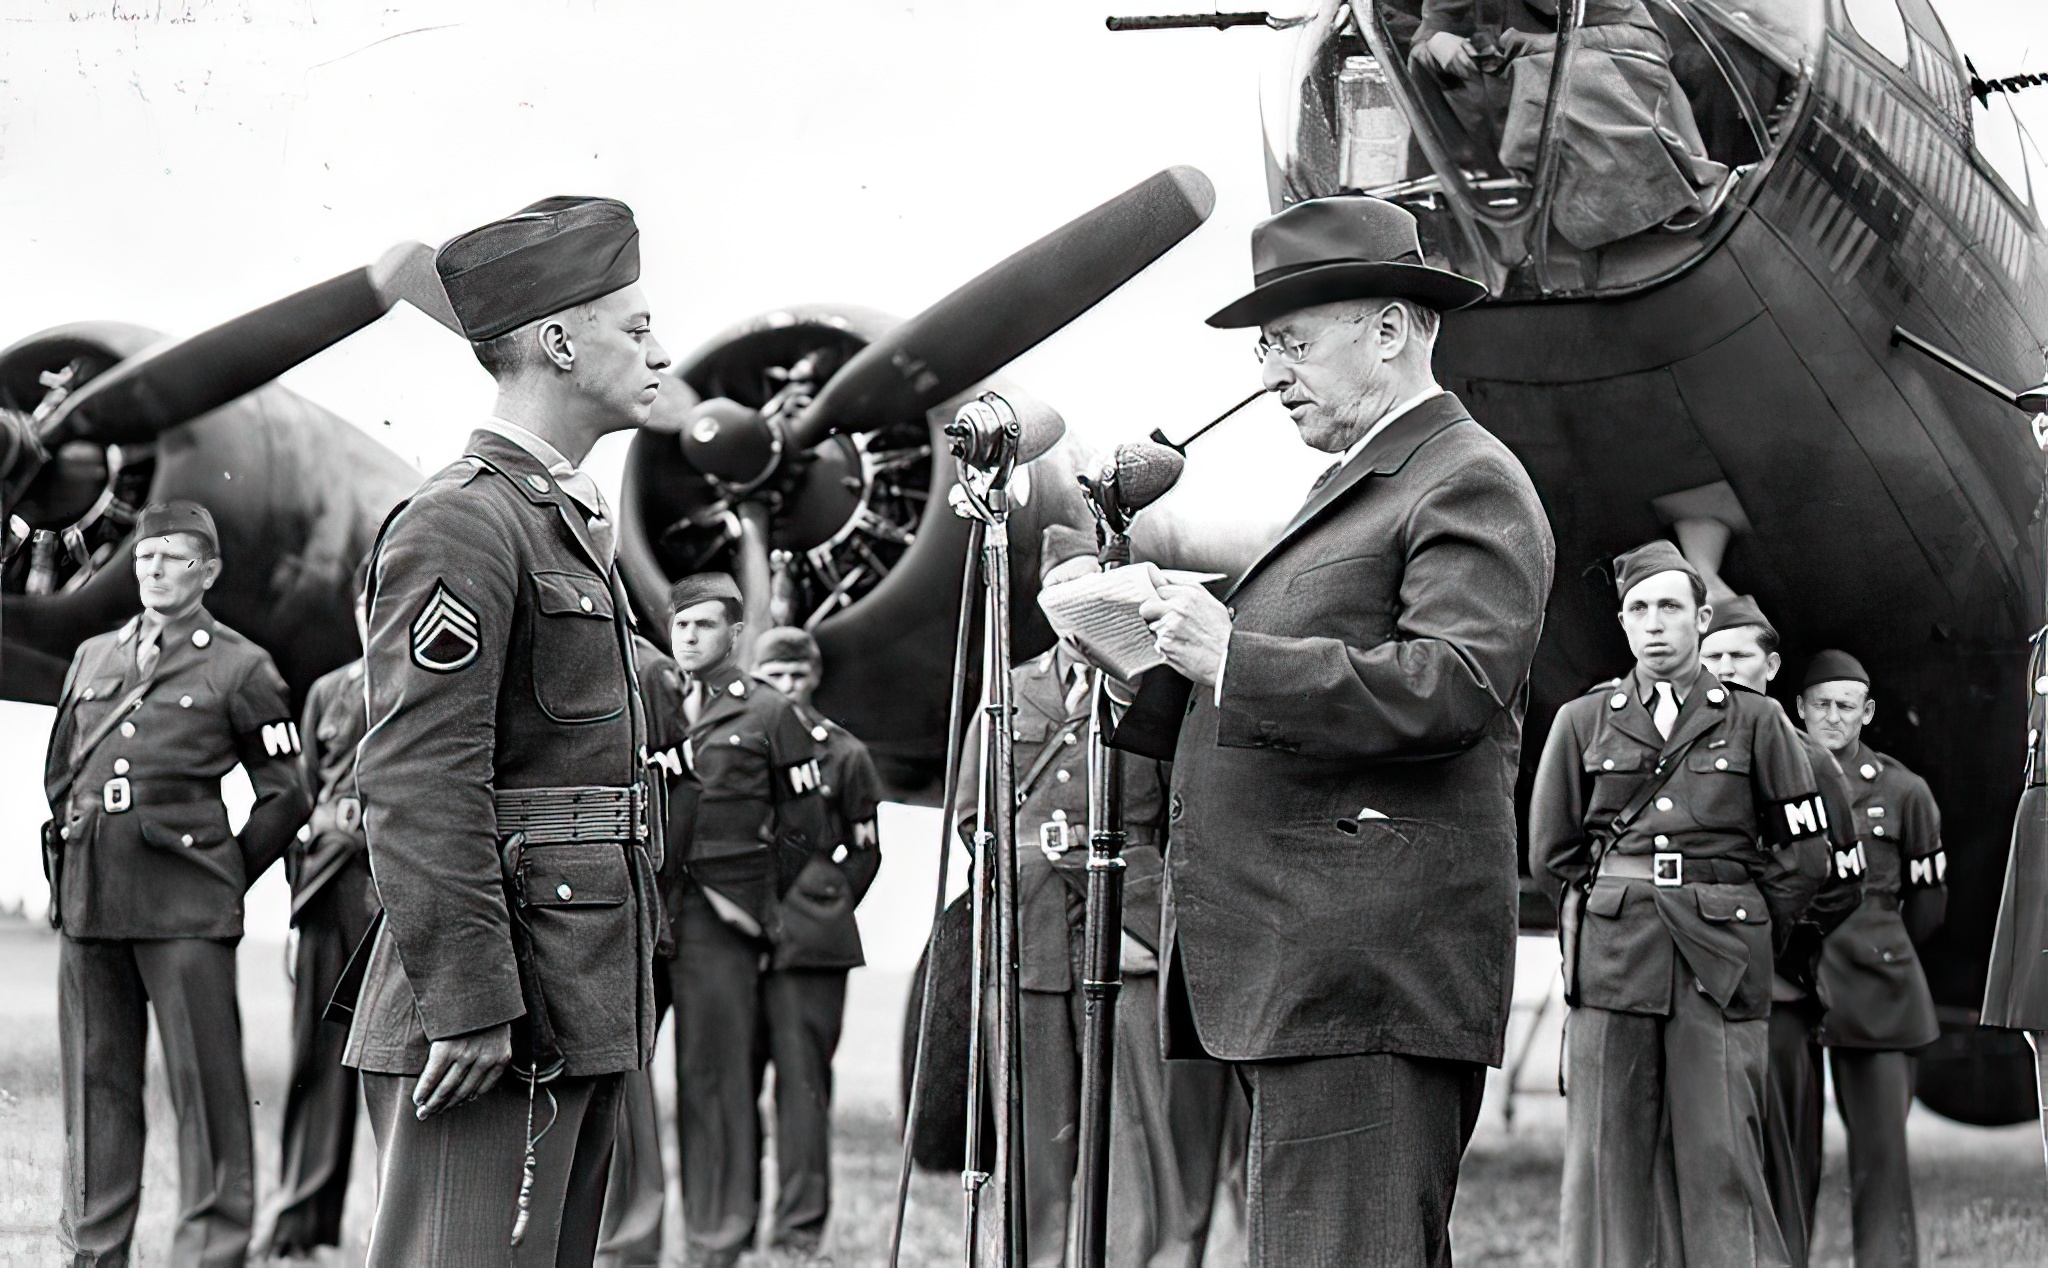 Staff Sergeant Maynard Smith of the 306th Bombardment Group, is presented with the Medal of Honor by Secretary of War Henry L Stimson in front of a B-17 Flying Fortress at Thurleigh Airfield, USAAF Station 111, England